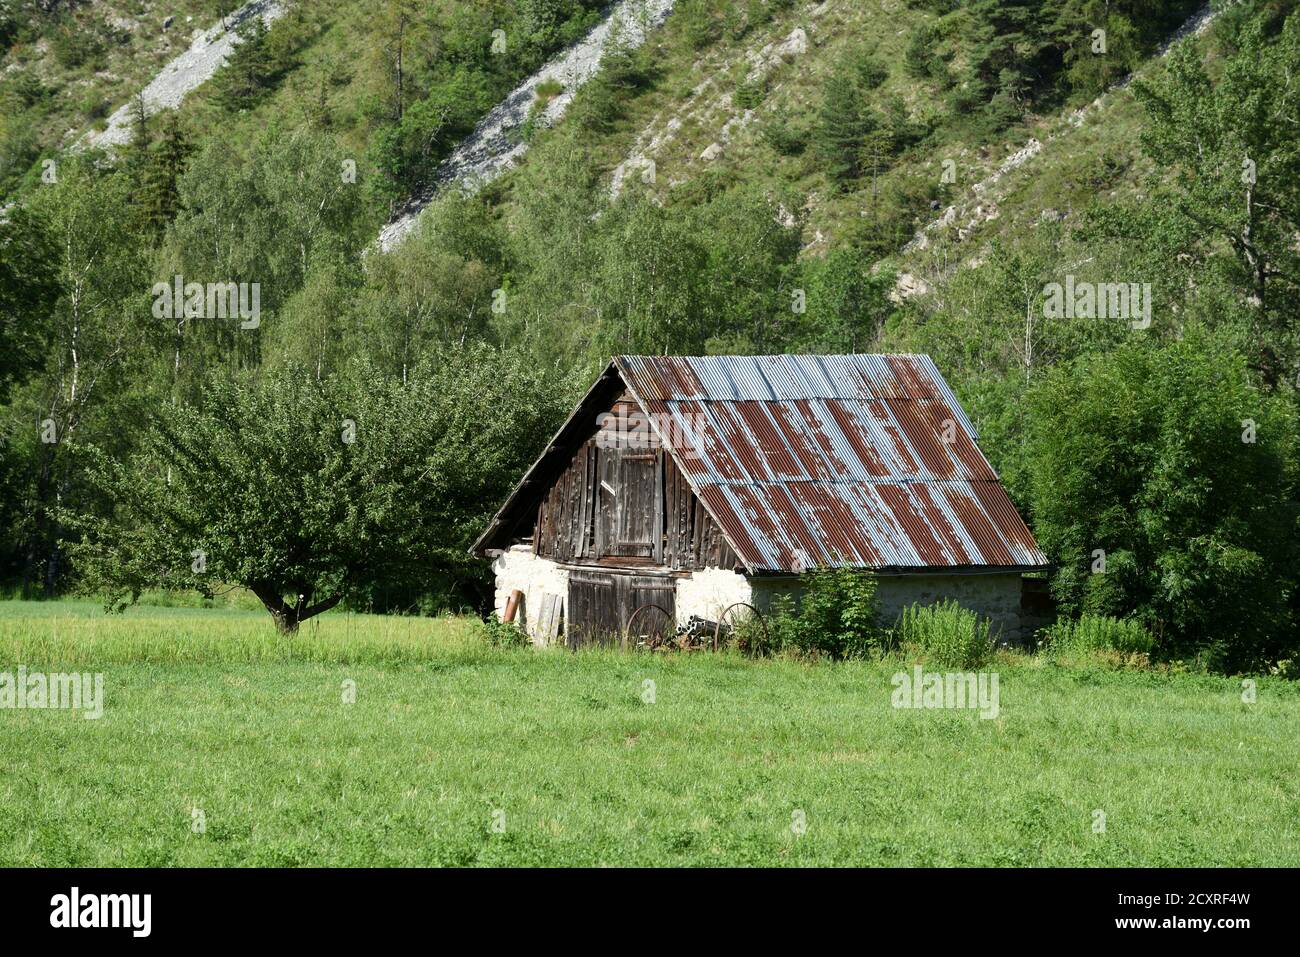 Small Alpine Hut, Agricultural Building or Rustic Chalet with Corrugated Iron Roof Allos Alpes-de-Haute-Provence Provence France Stock Photo